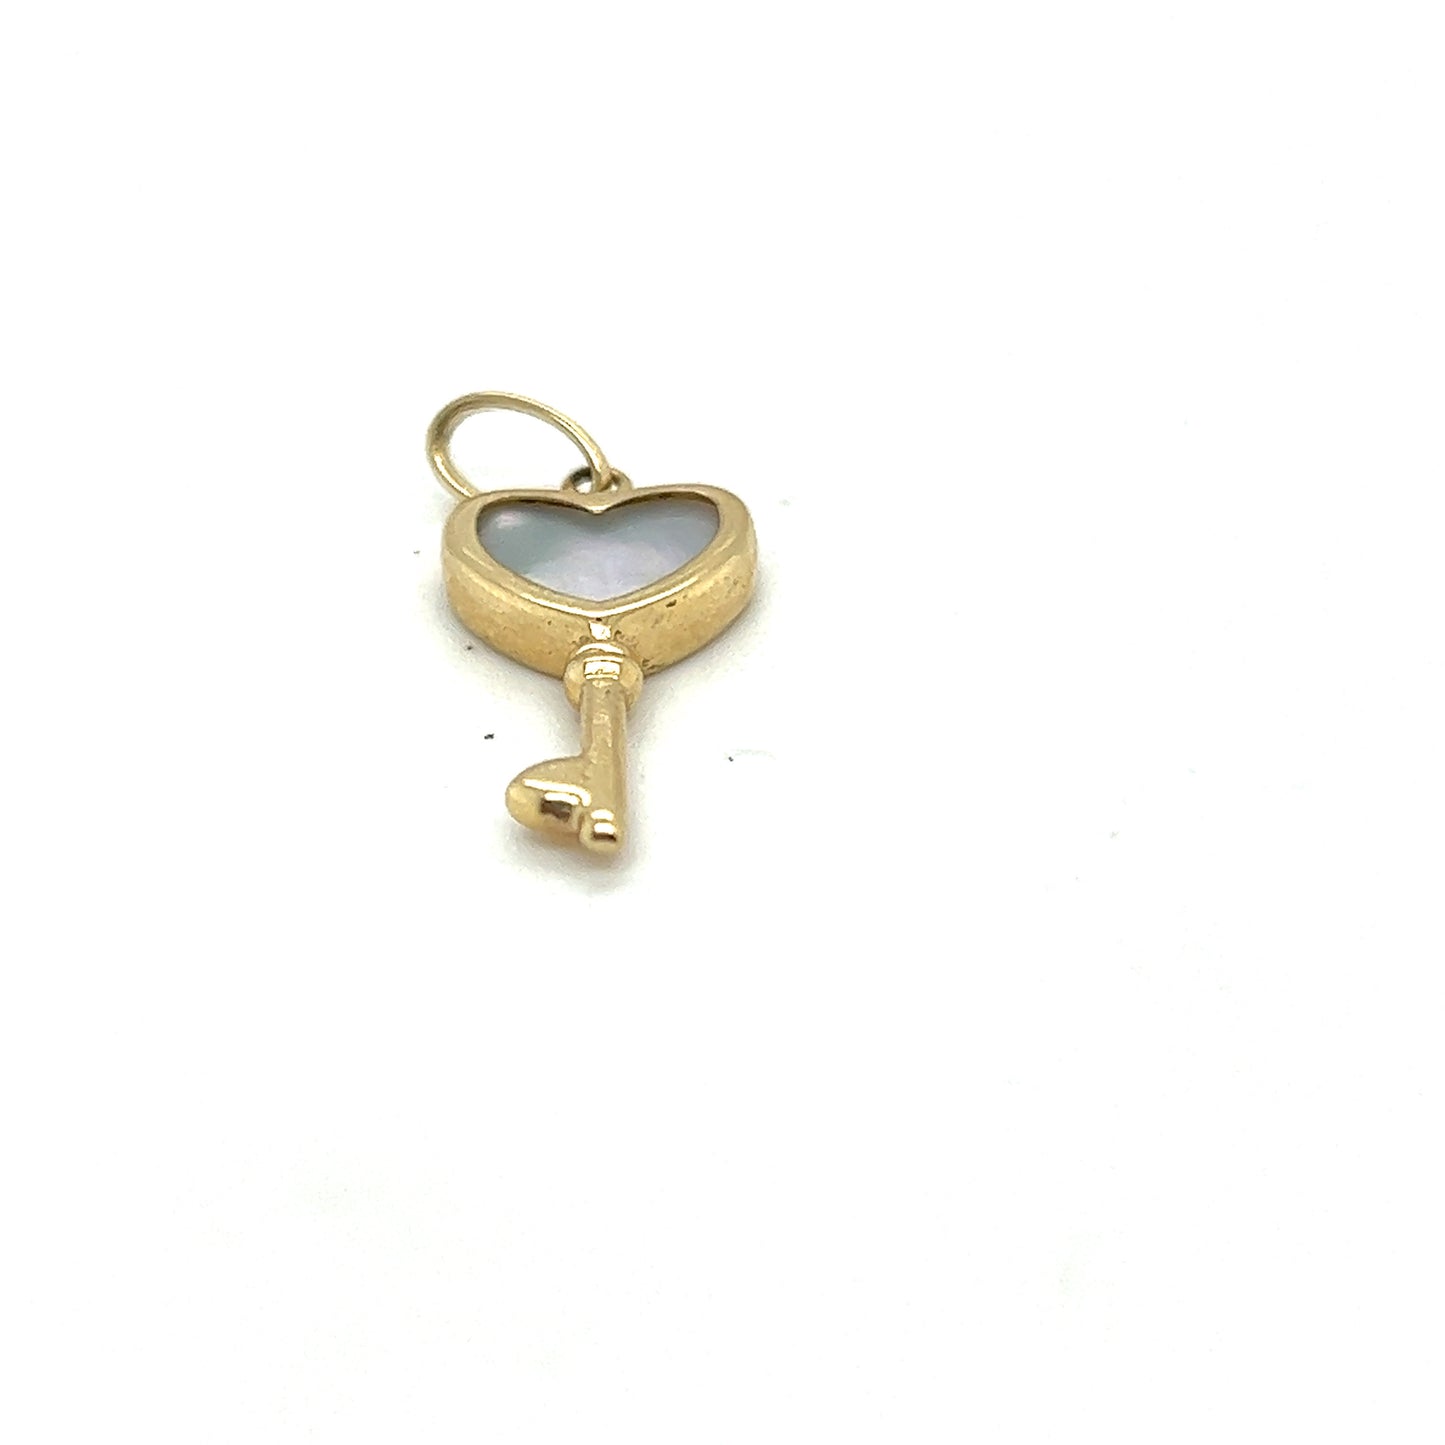 14K Yellow Gold Heart Key Pendant With White Sapphire